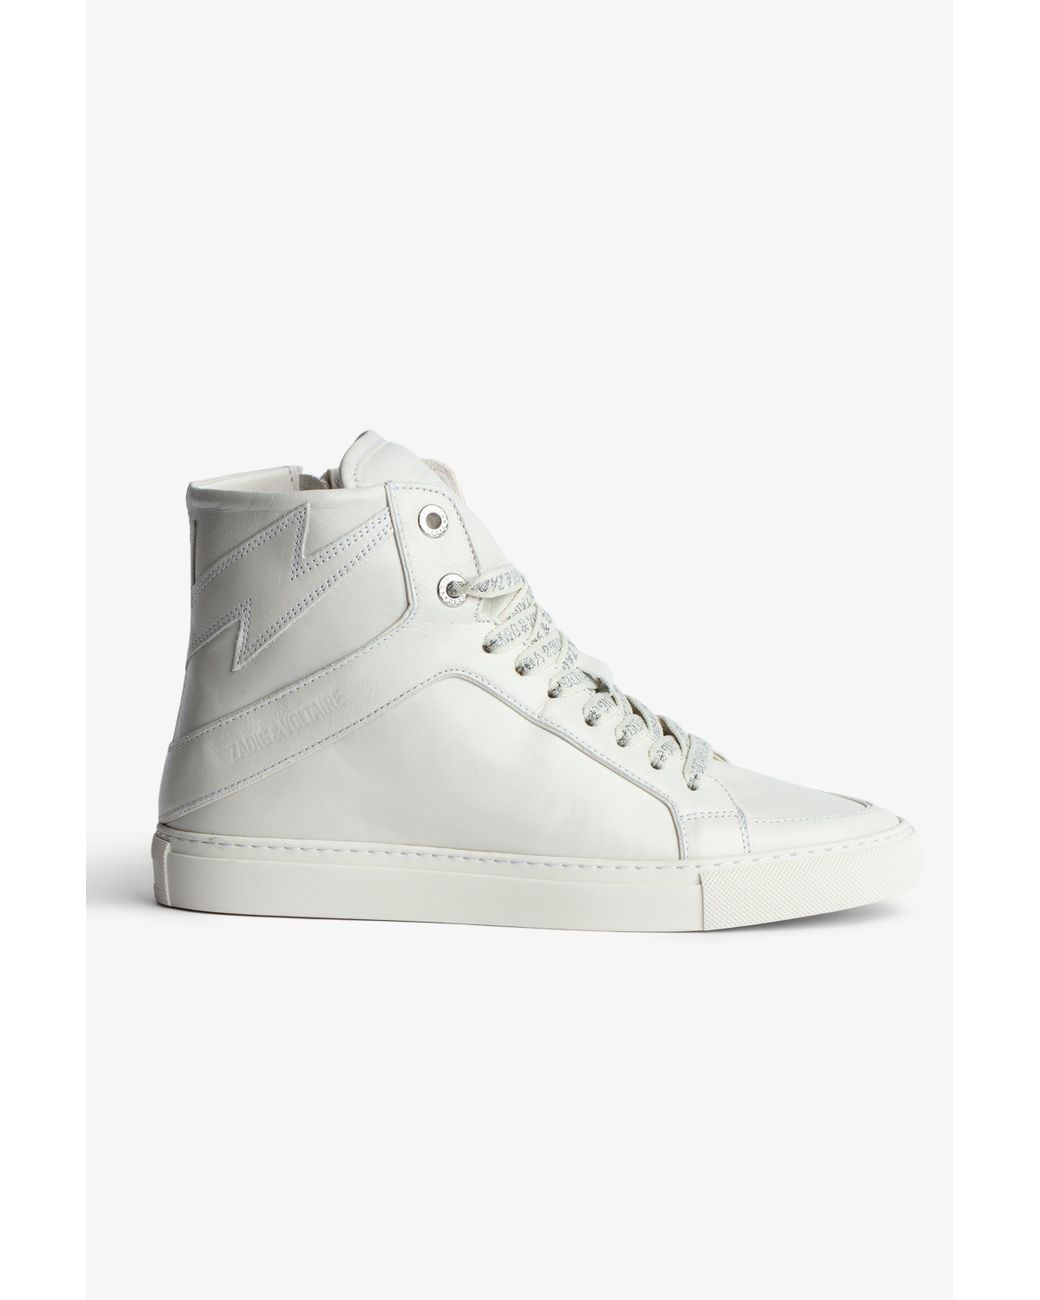 Zadig & Voltaire Zv1747 High Flash Vintage Sneakers in White | Lyst